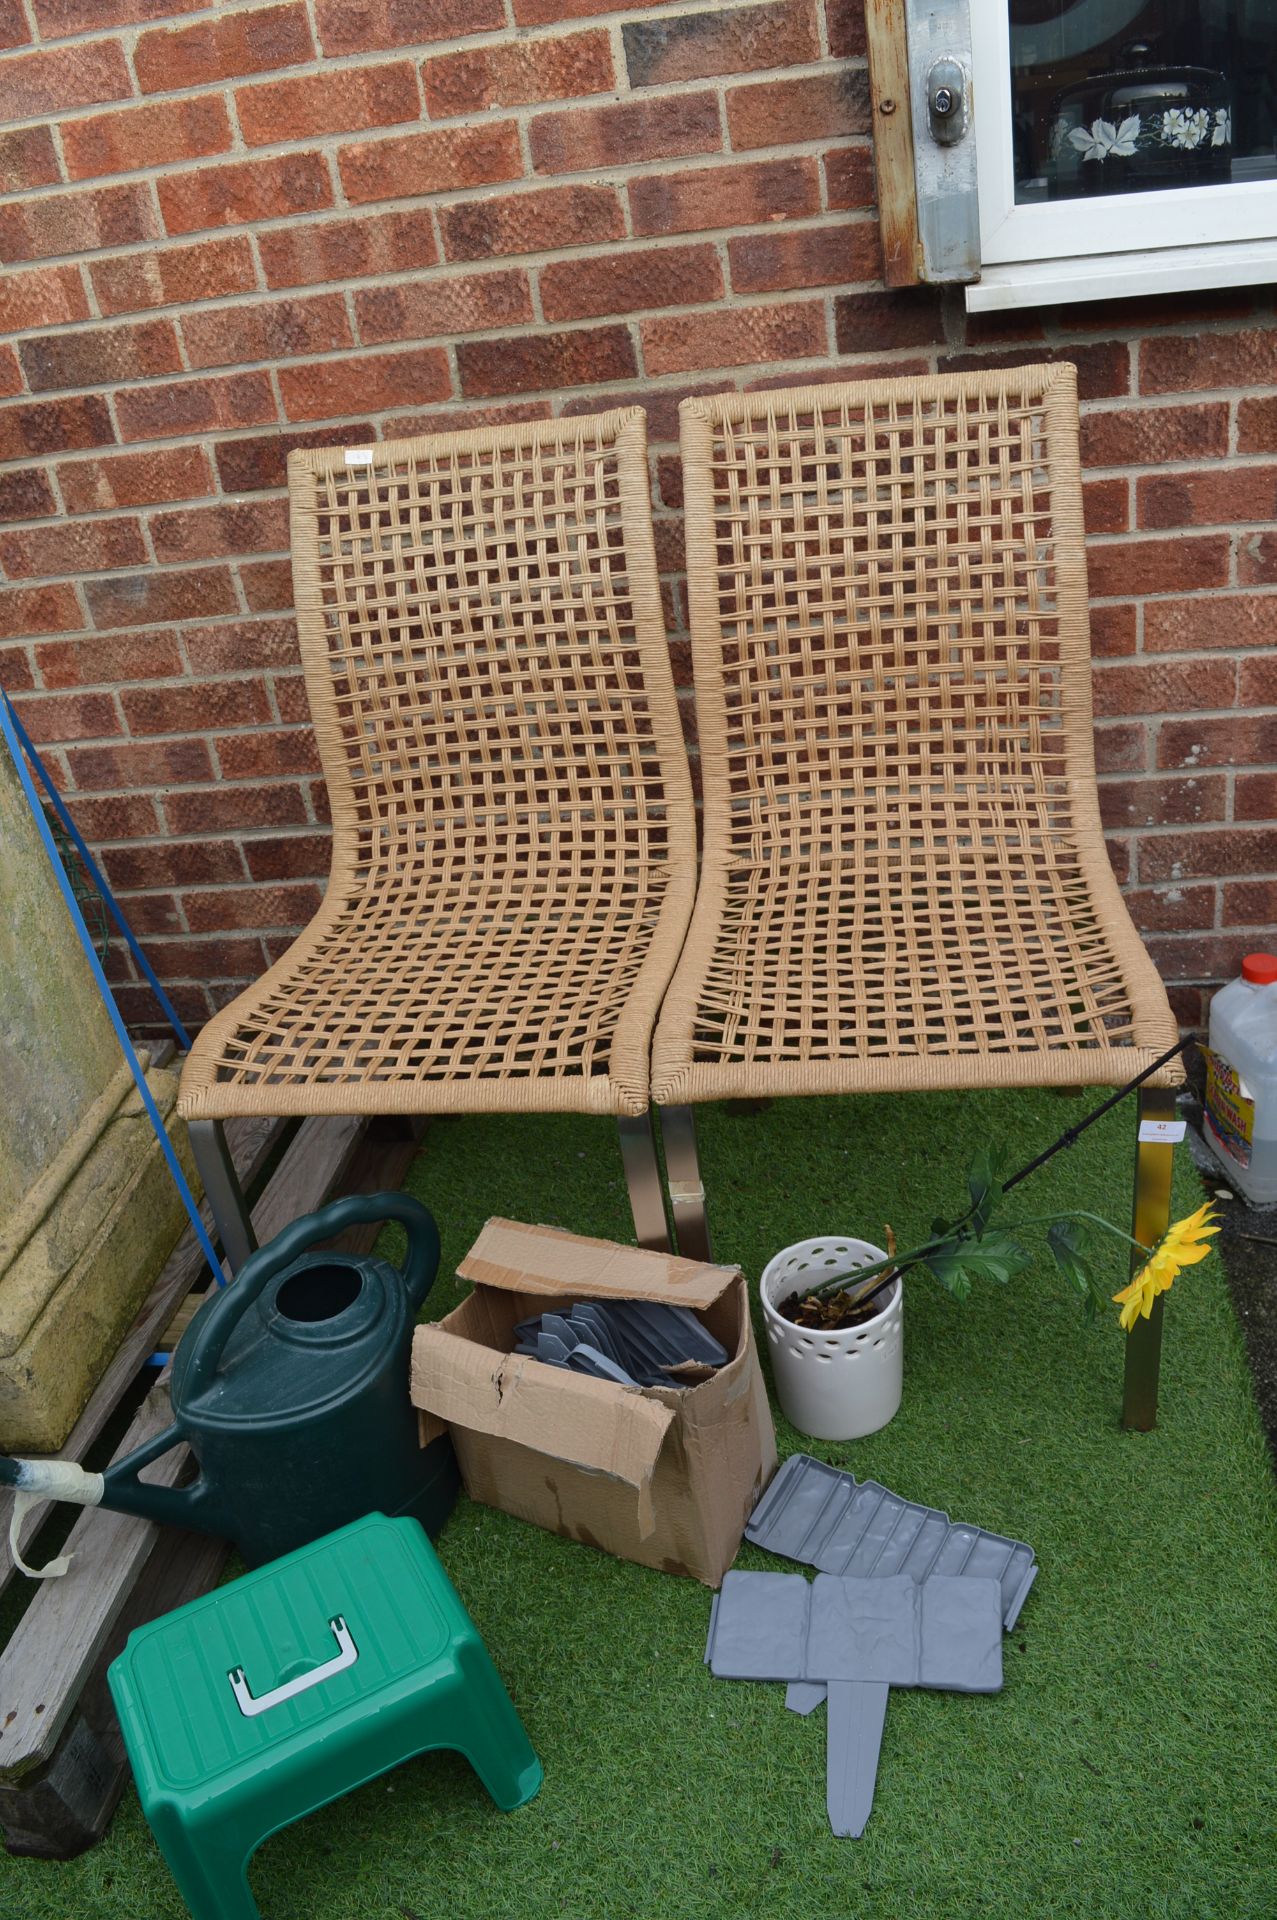 Pair of Basket Weave Garden Chairs, Watering Can,